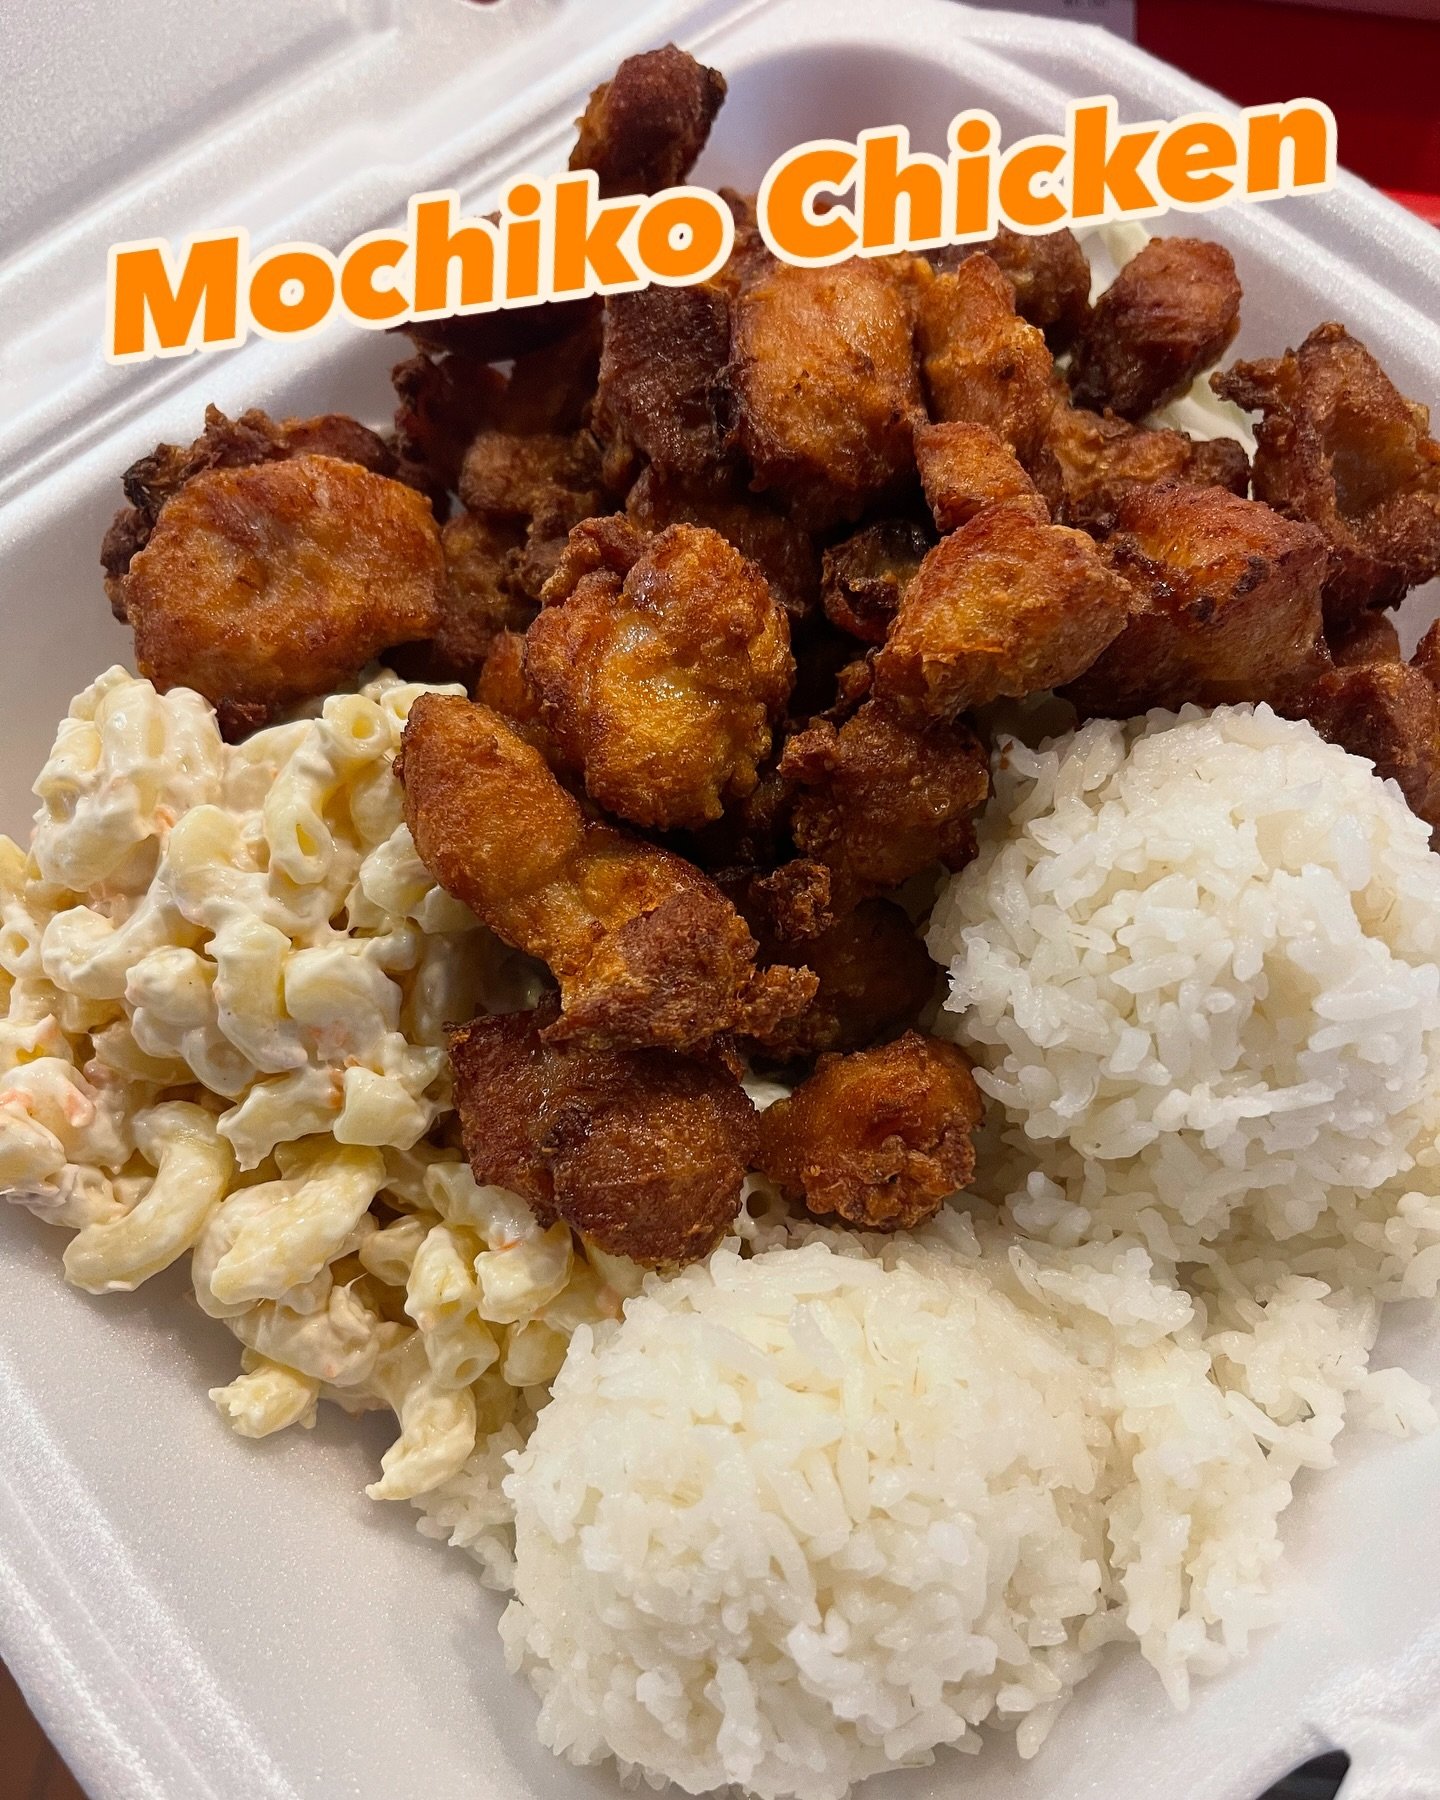 Have you tried our Mochiko Chicken plate lunch?